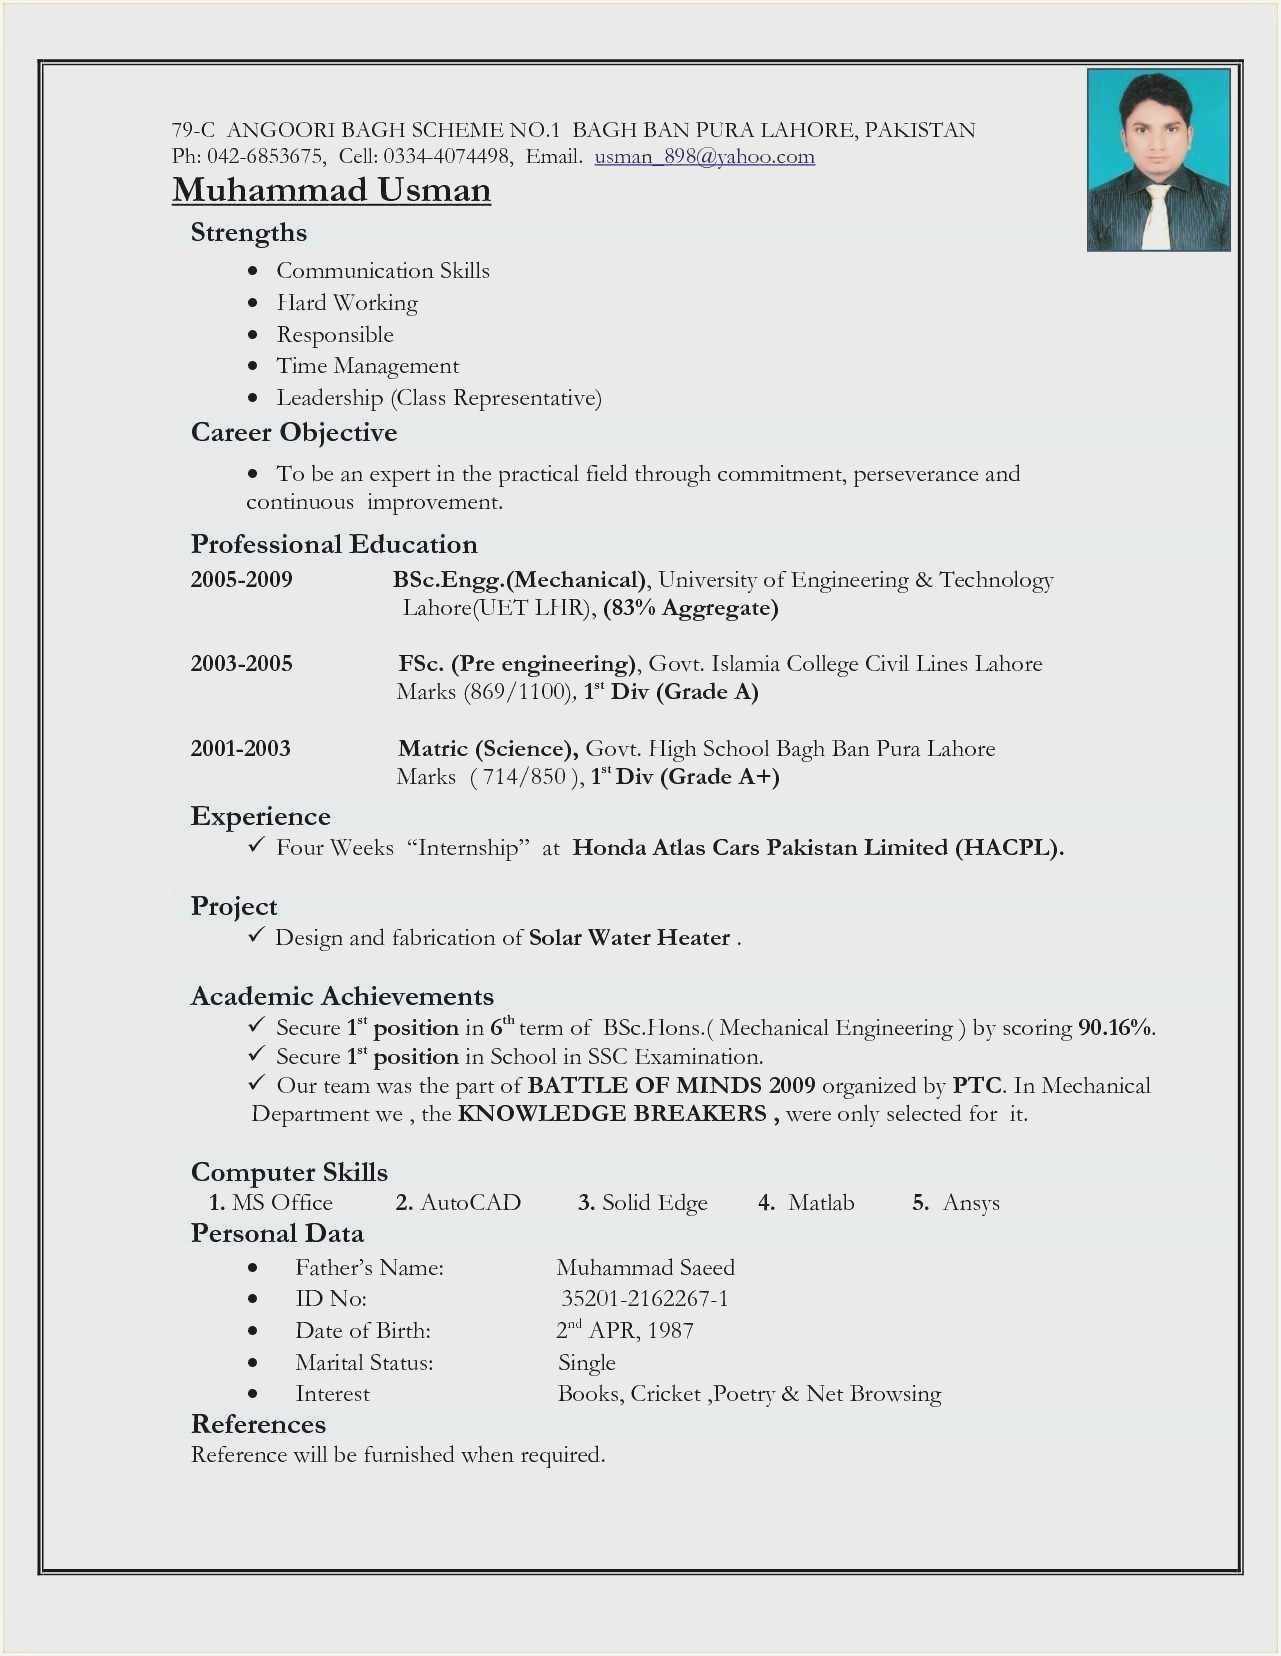 Resume Samples for Mba Freshers Free Download Resume format for Freshers Mba Pdf